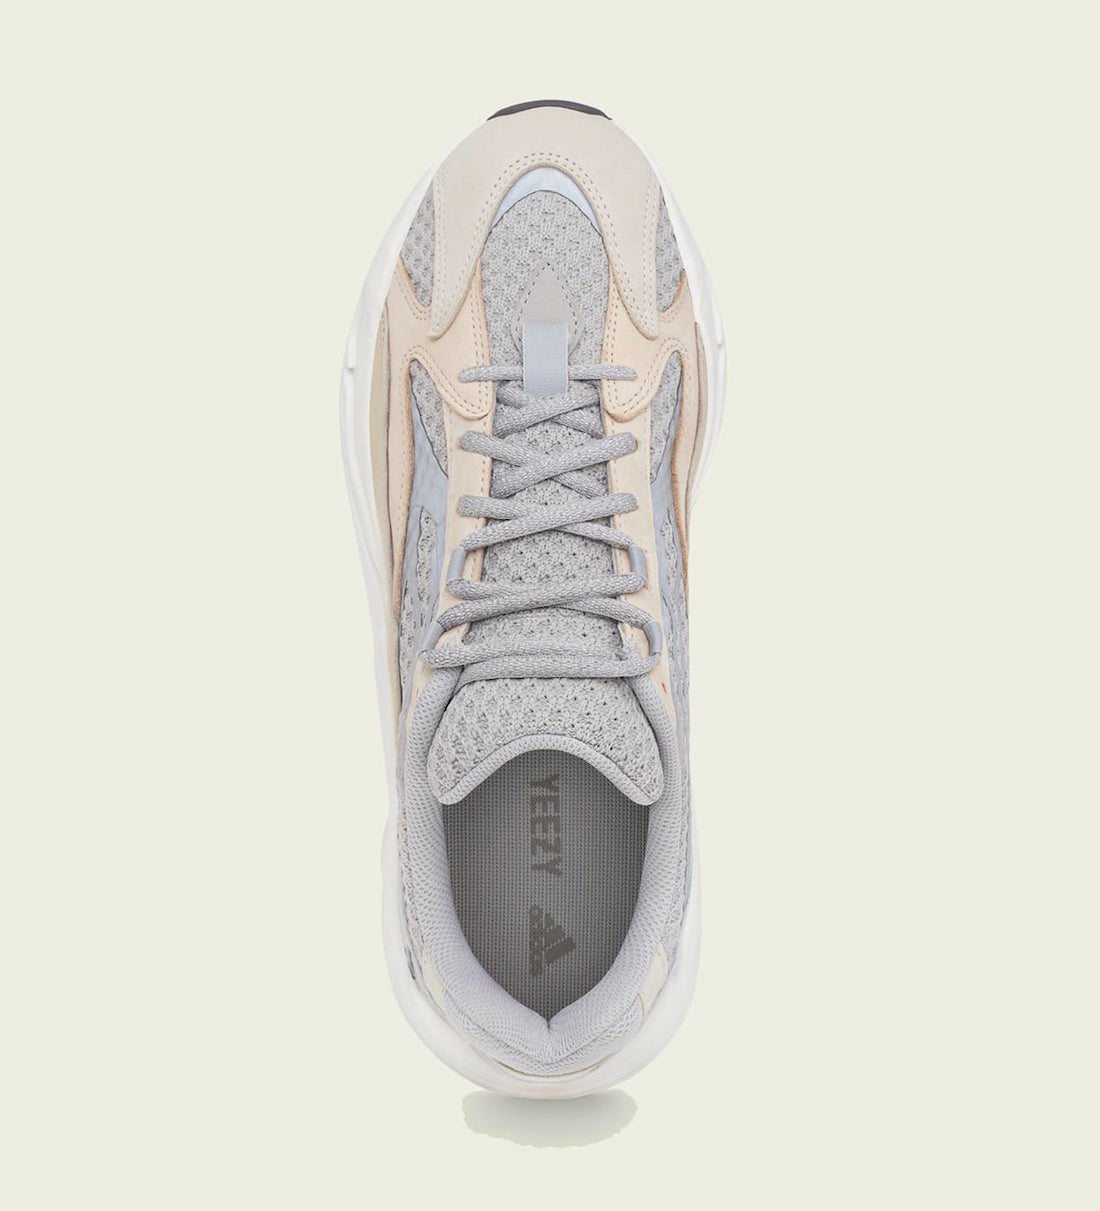 yeezy-700-v2-cream-release-date-price-resell-where-to-buy-2